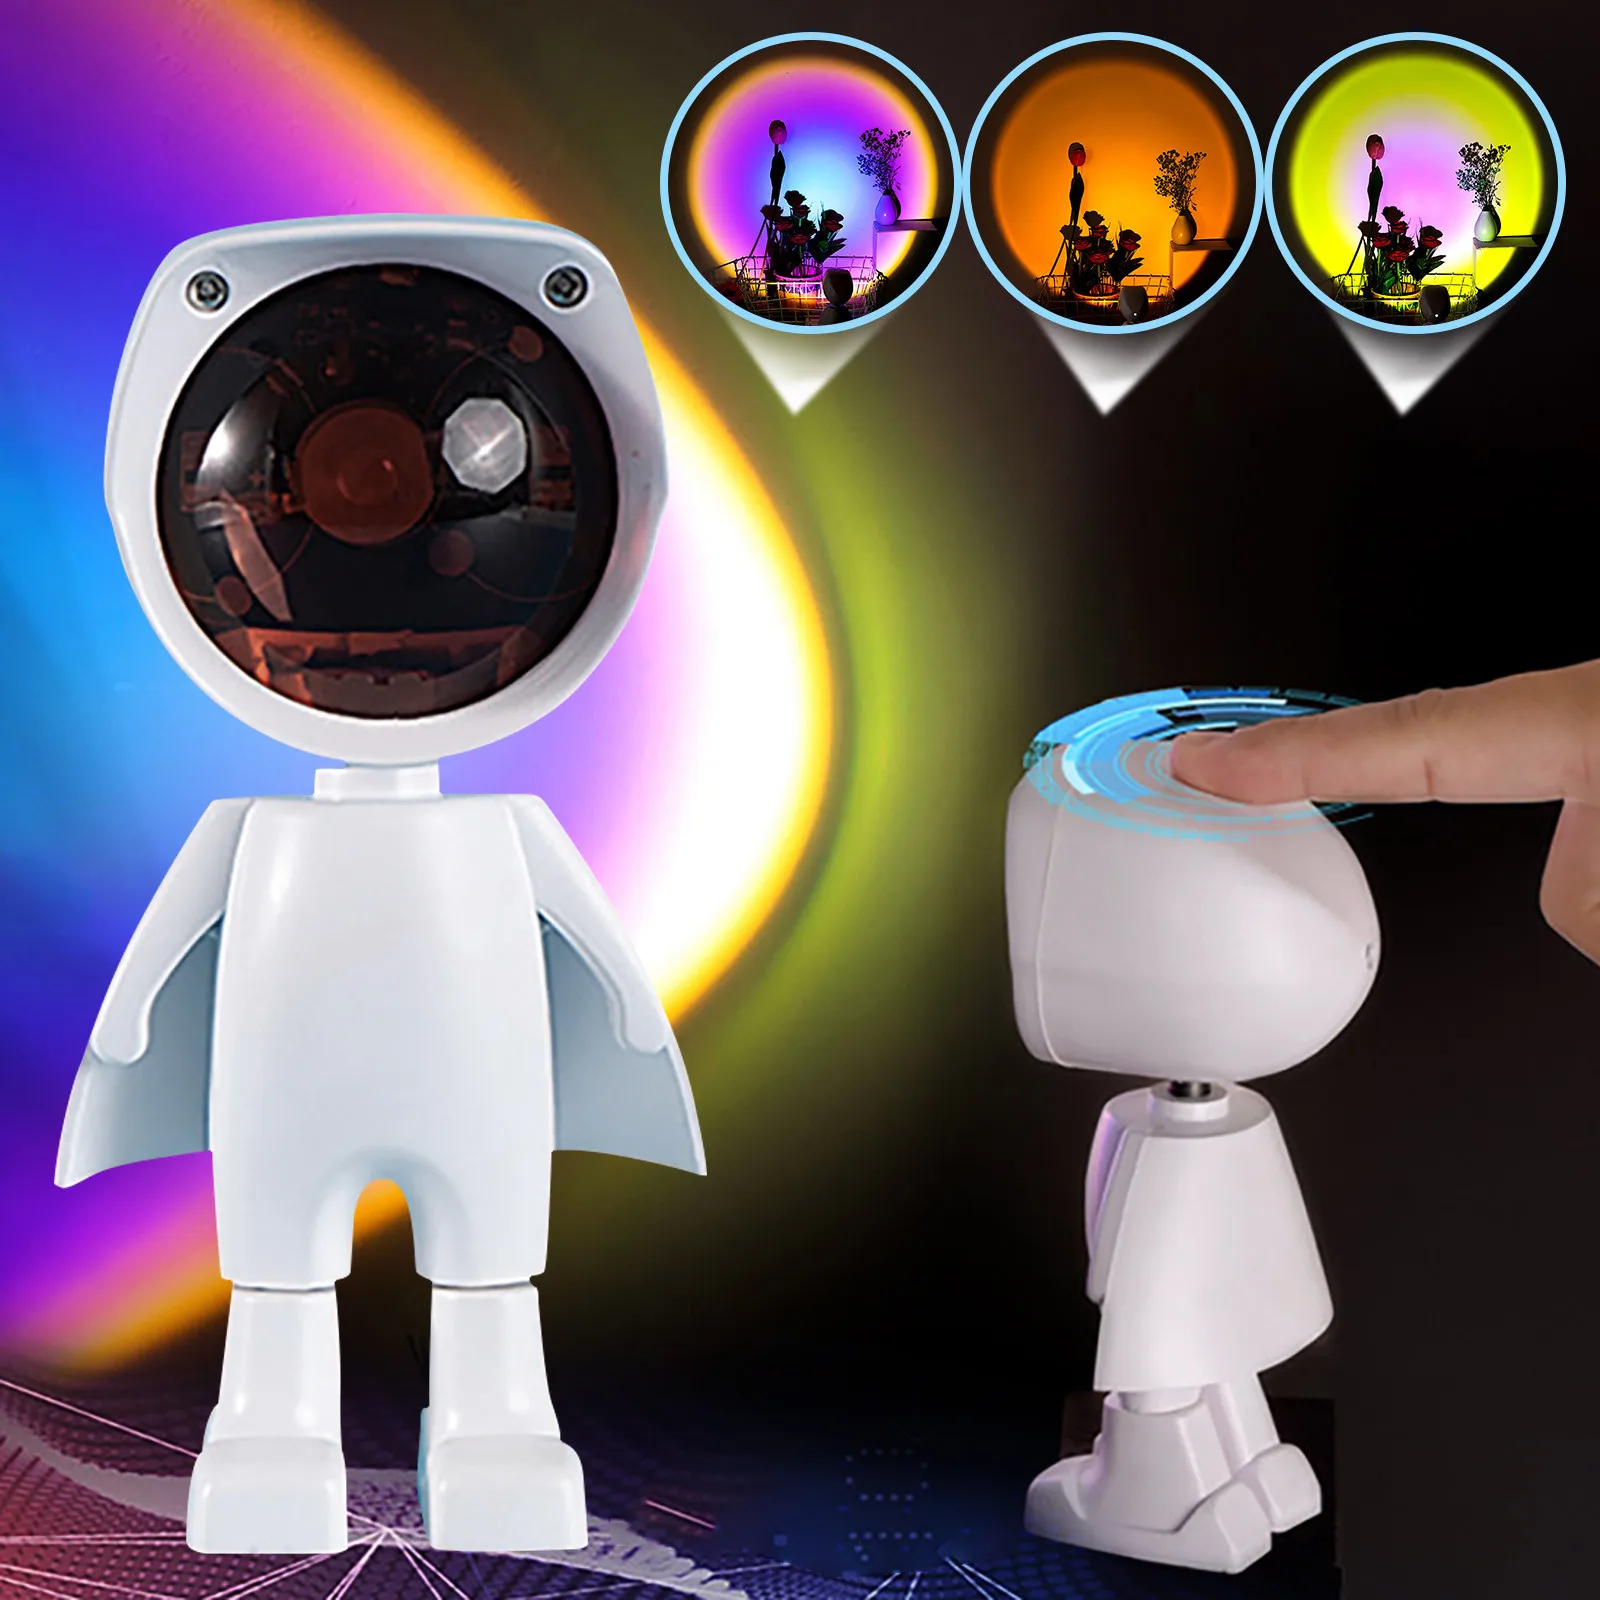 40#sunset Projector Lamp Rainbow Astronaut Atmosphere Led Night Light Home Bedroom Coffe Shop Wall Decoration Usb Table Lamp